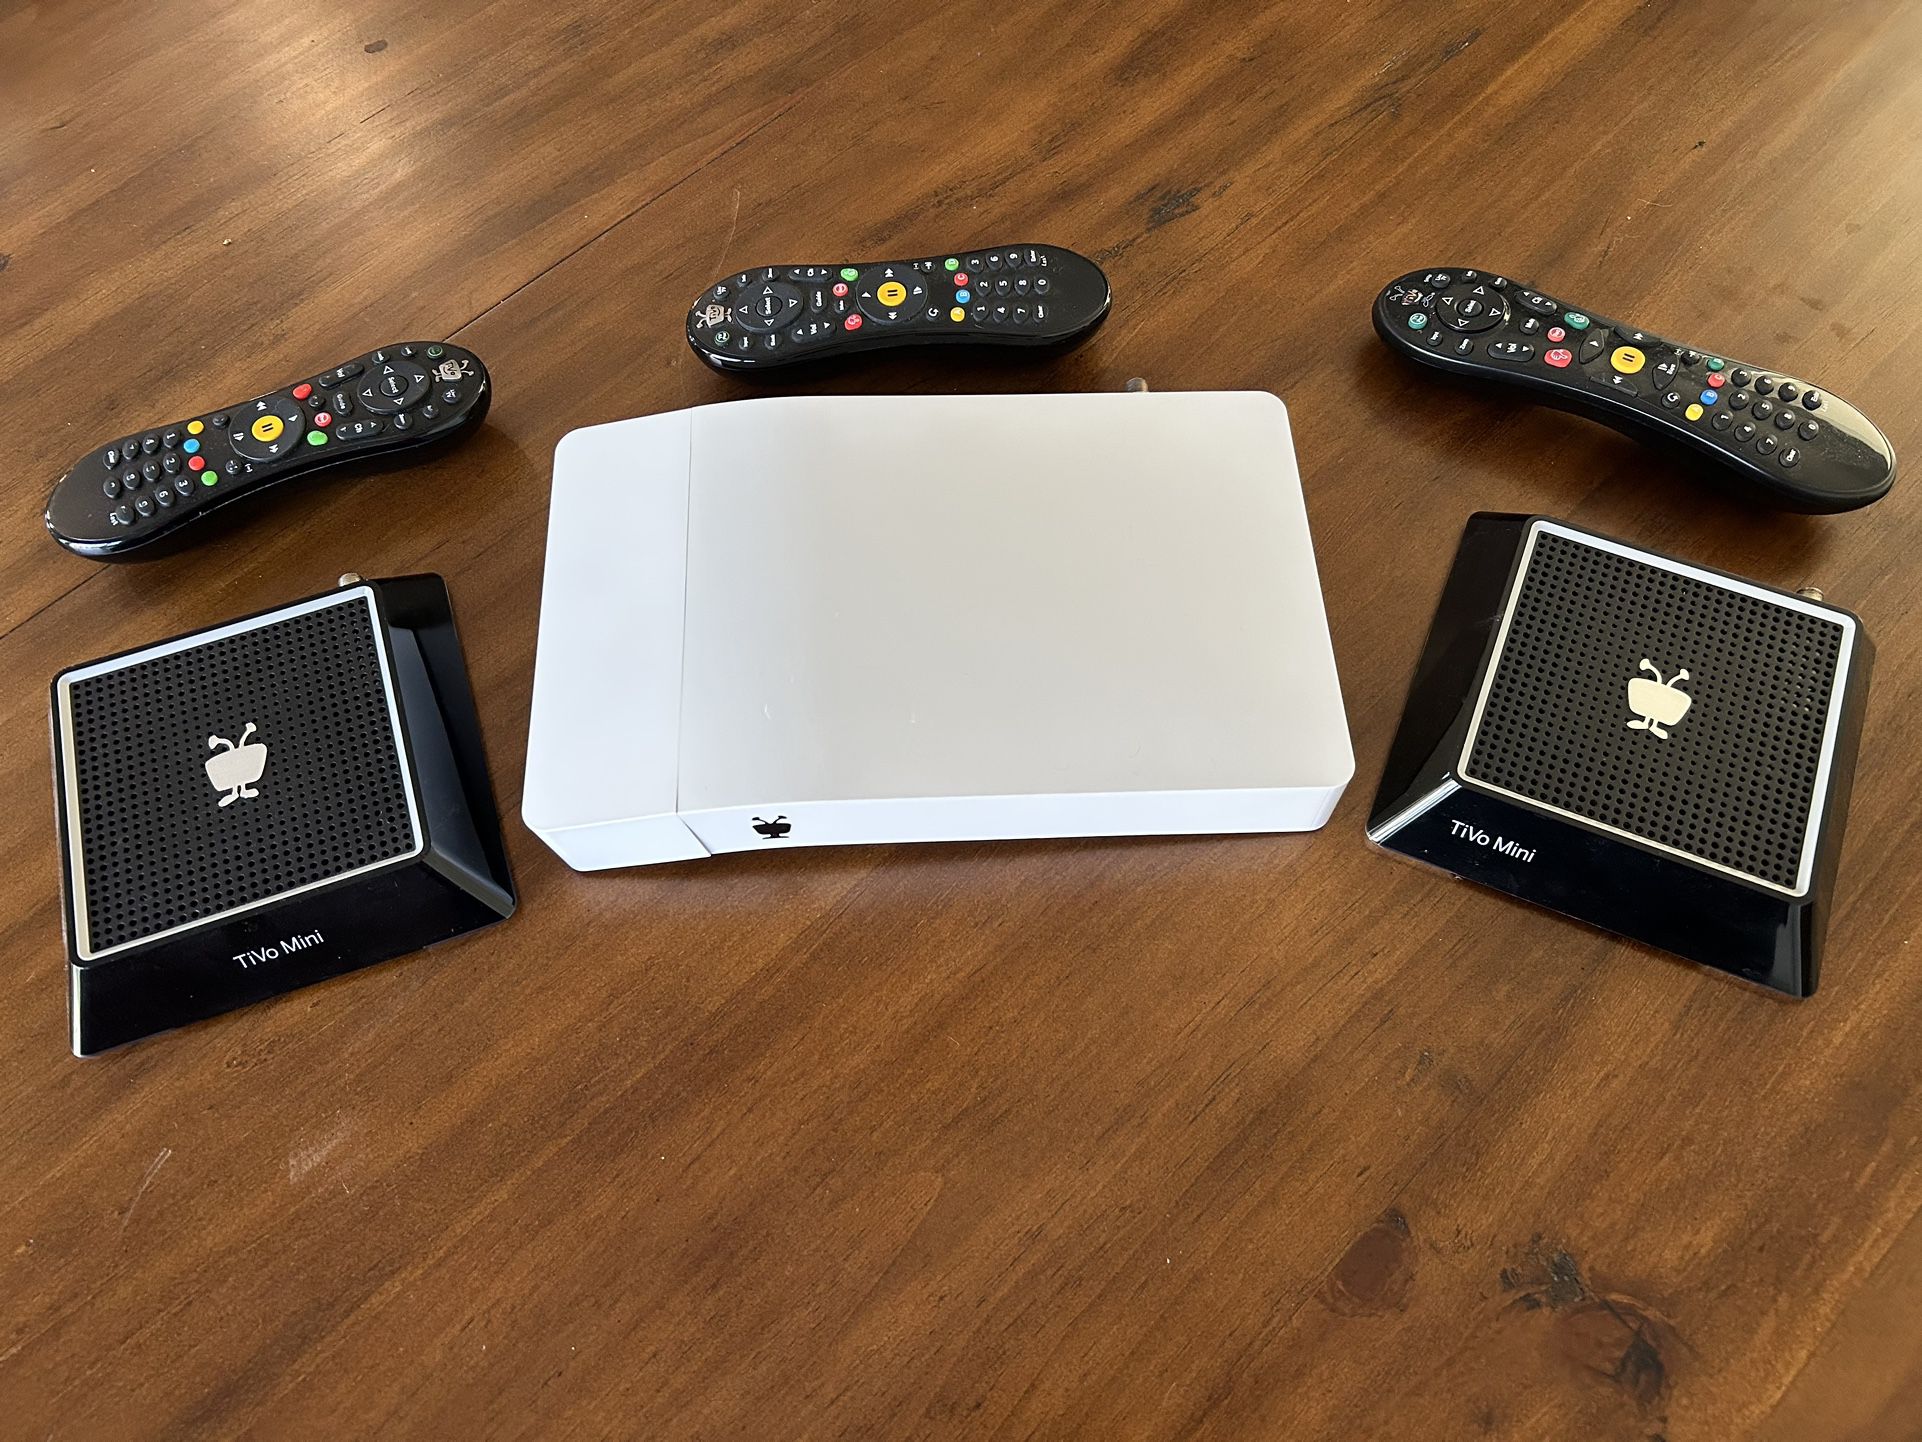 Lifetime Service Included! TiVo Bolt And 2 TiVo Minis